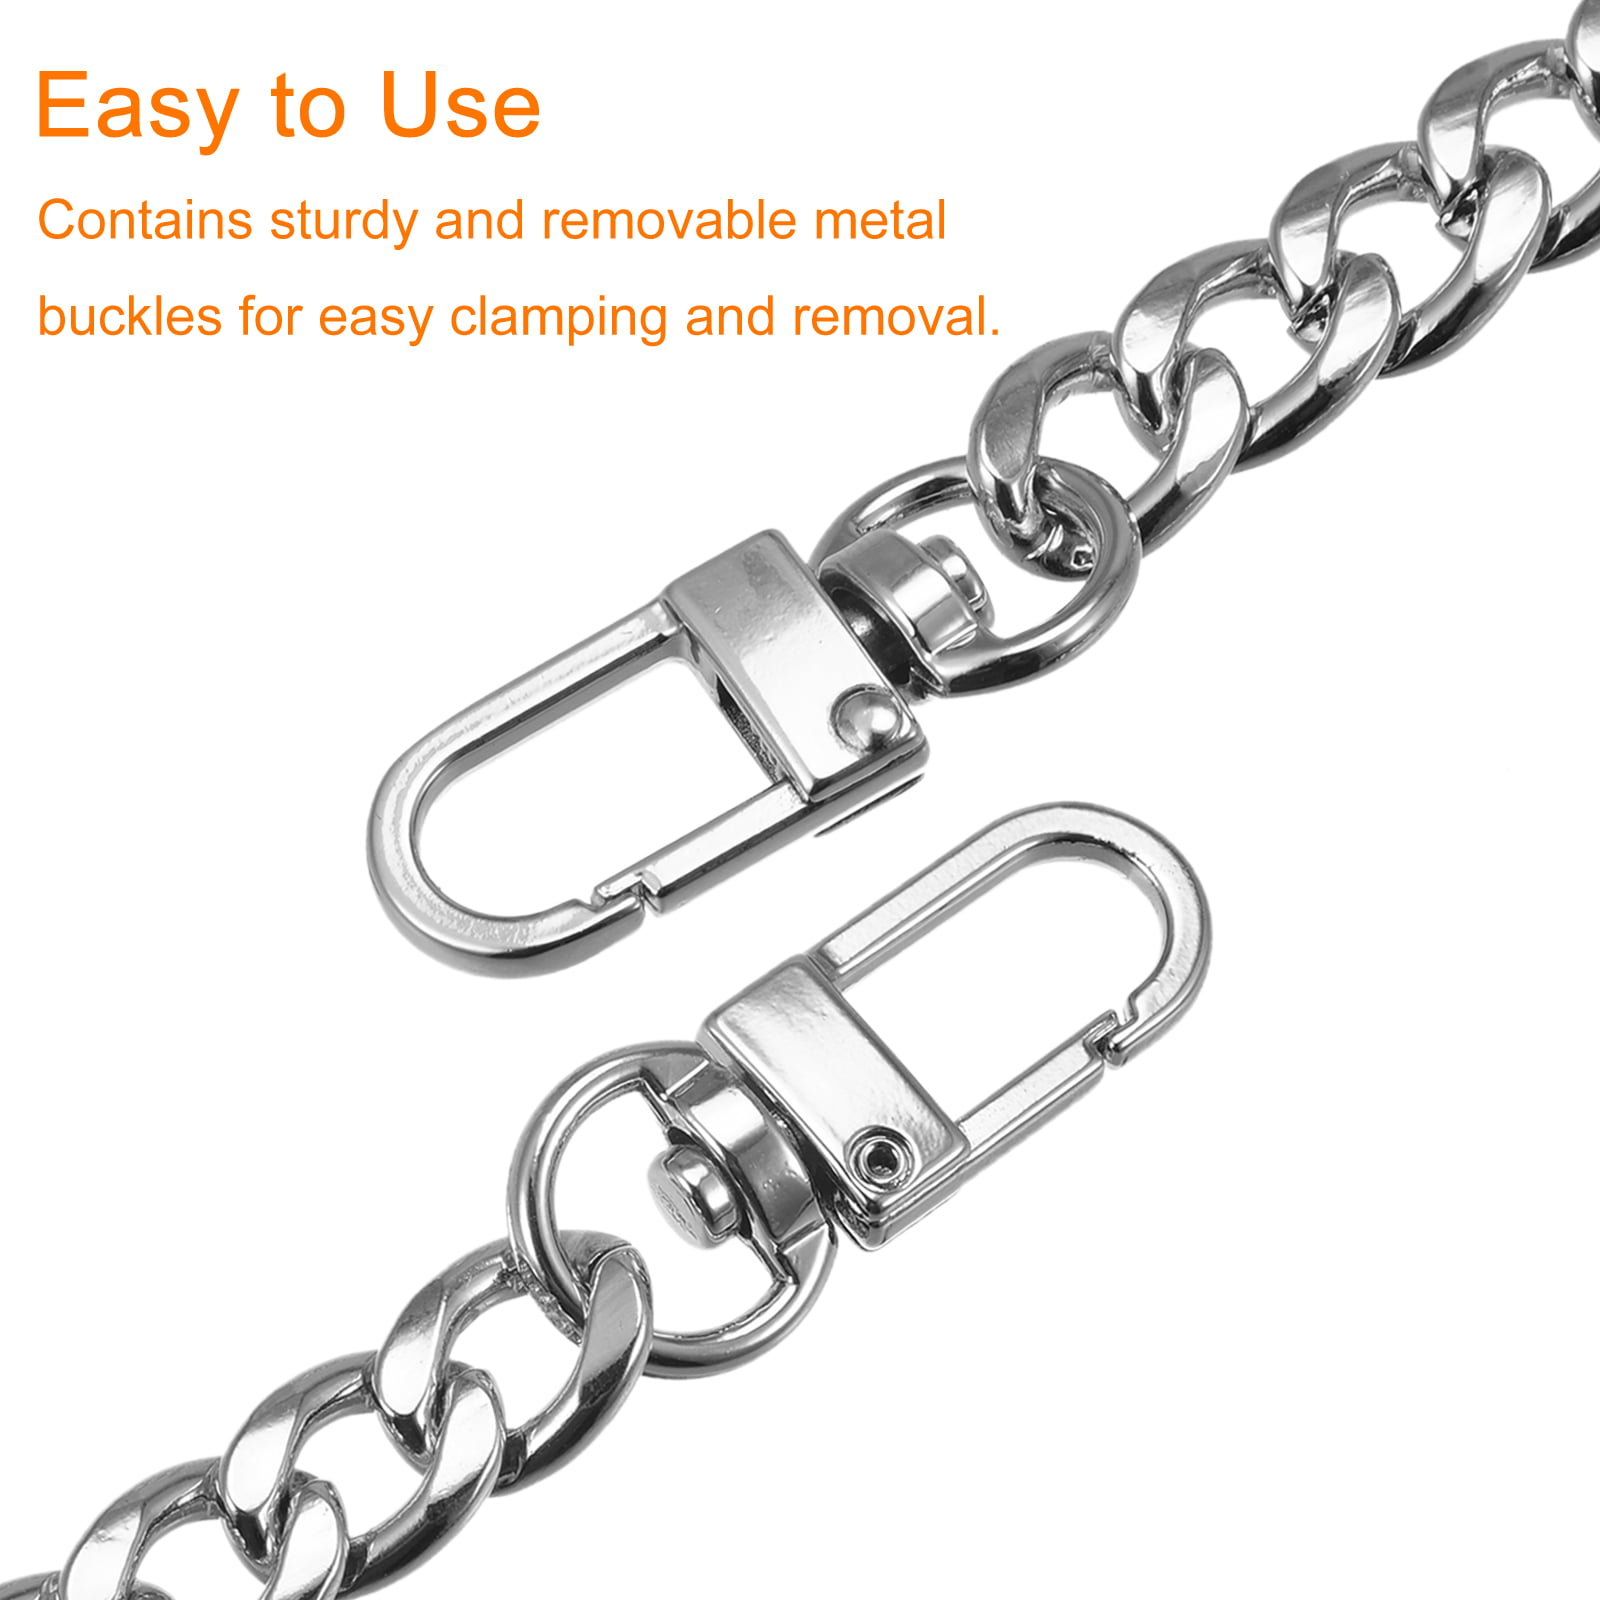 Yuronam 1 Pack Flat Purse Chain Iron Bag Link Chains Shoulder Straps Chains with Metal Buckles Hook for Replacement, DIY Handbags Crafts, 7.9 Inches